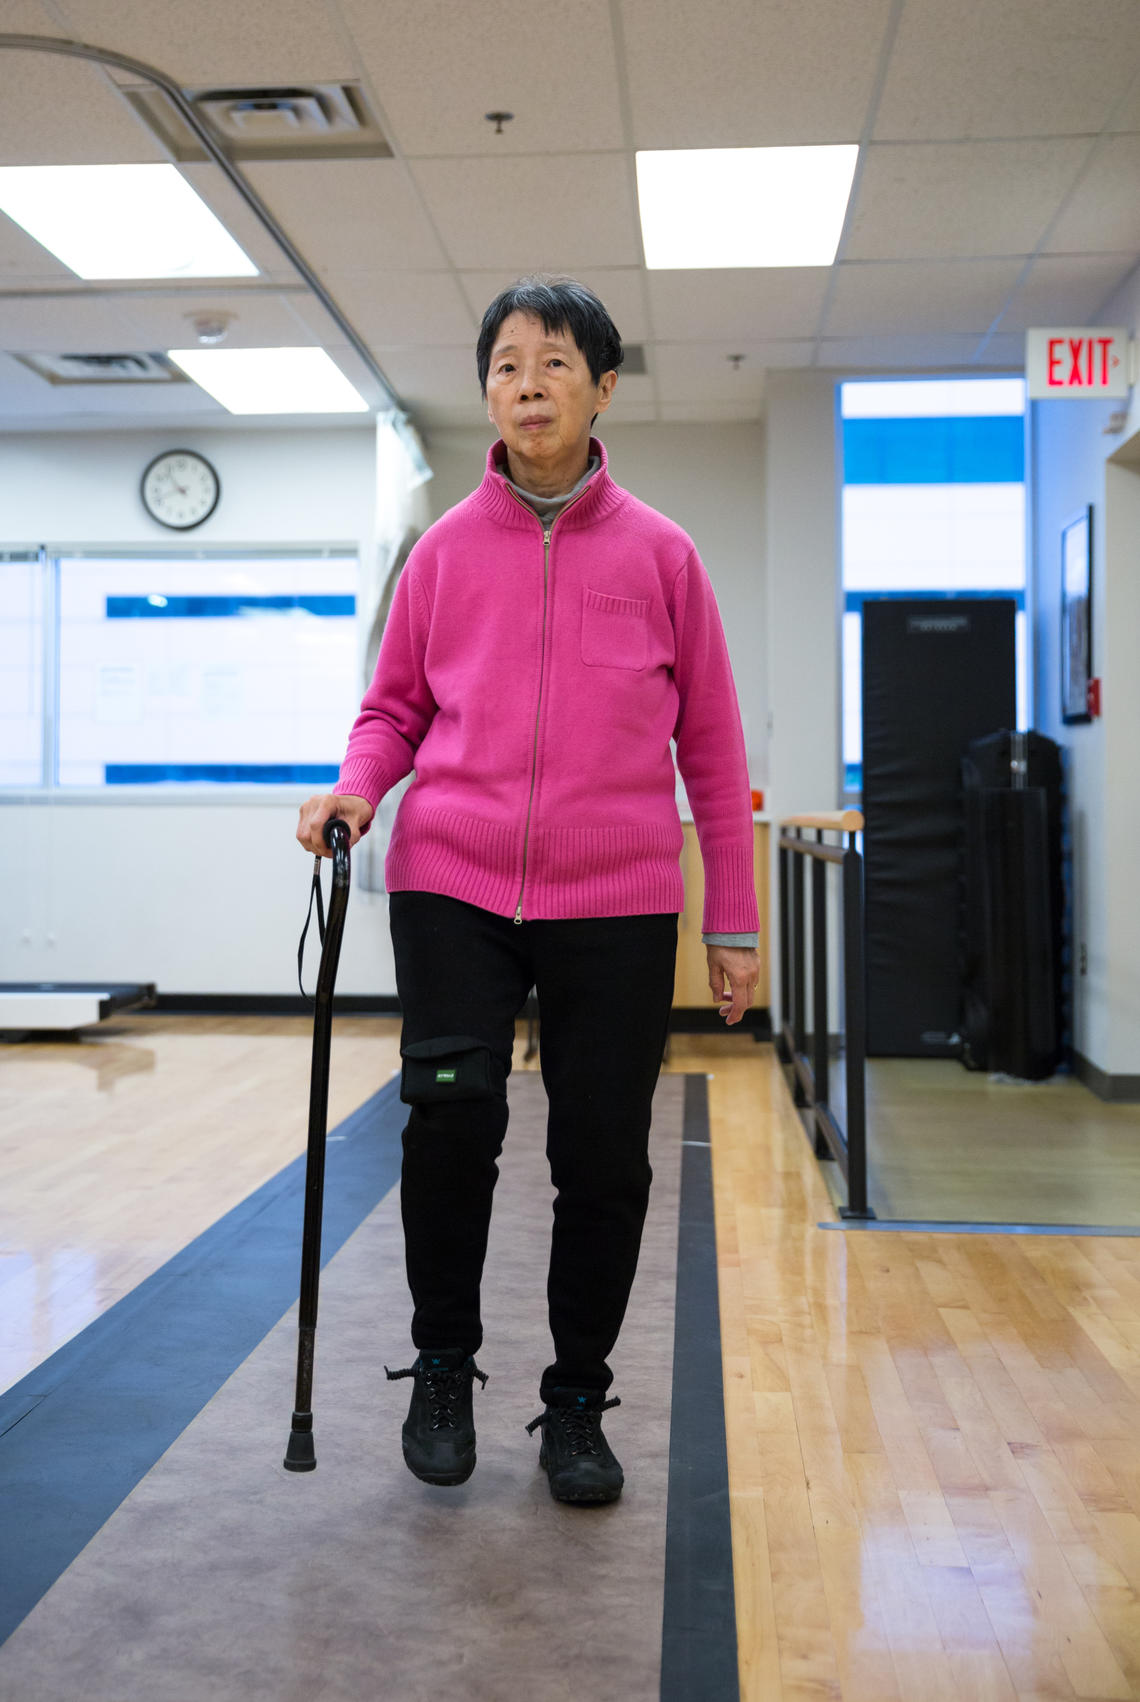 Vivien Poon, who was diagnosed with Parkinson’s disease 10 years ago, demonstrates one of the mobility tests conducted in the research study. Participants underwent a six-minute walking test using an Ambulosono wearable sensor system (seen on Vivien’s right leg). The demonstration occurred at the Clinical and Translational Exercise Physiology Laboratory, which investigates the role of exercise in the prevention and management of chronic diseases, including neurodegeneration conditions related to aging such 